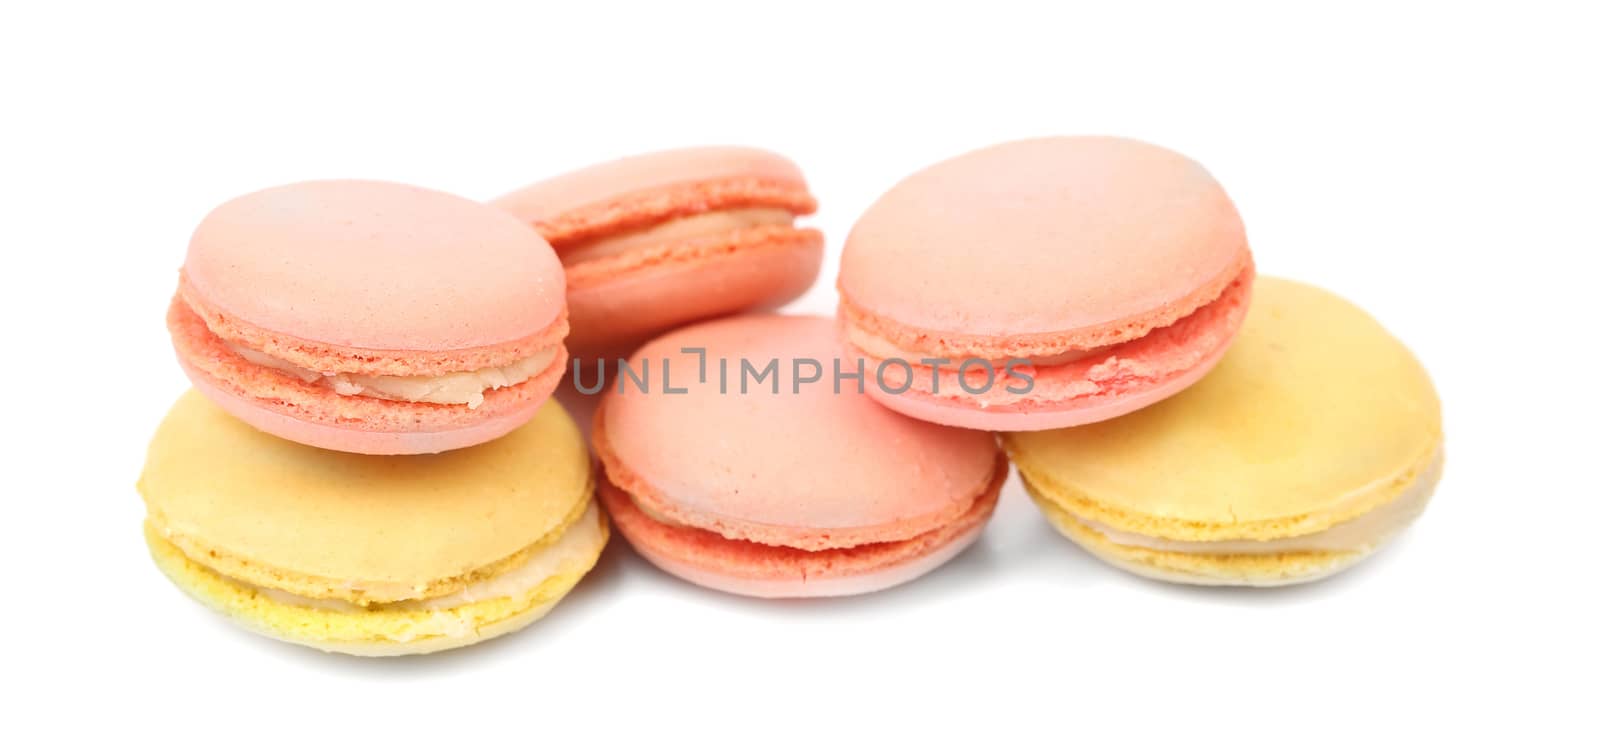 Bunch of macaron cake. Isolated on a white background.